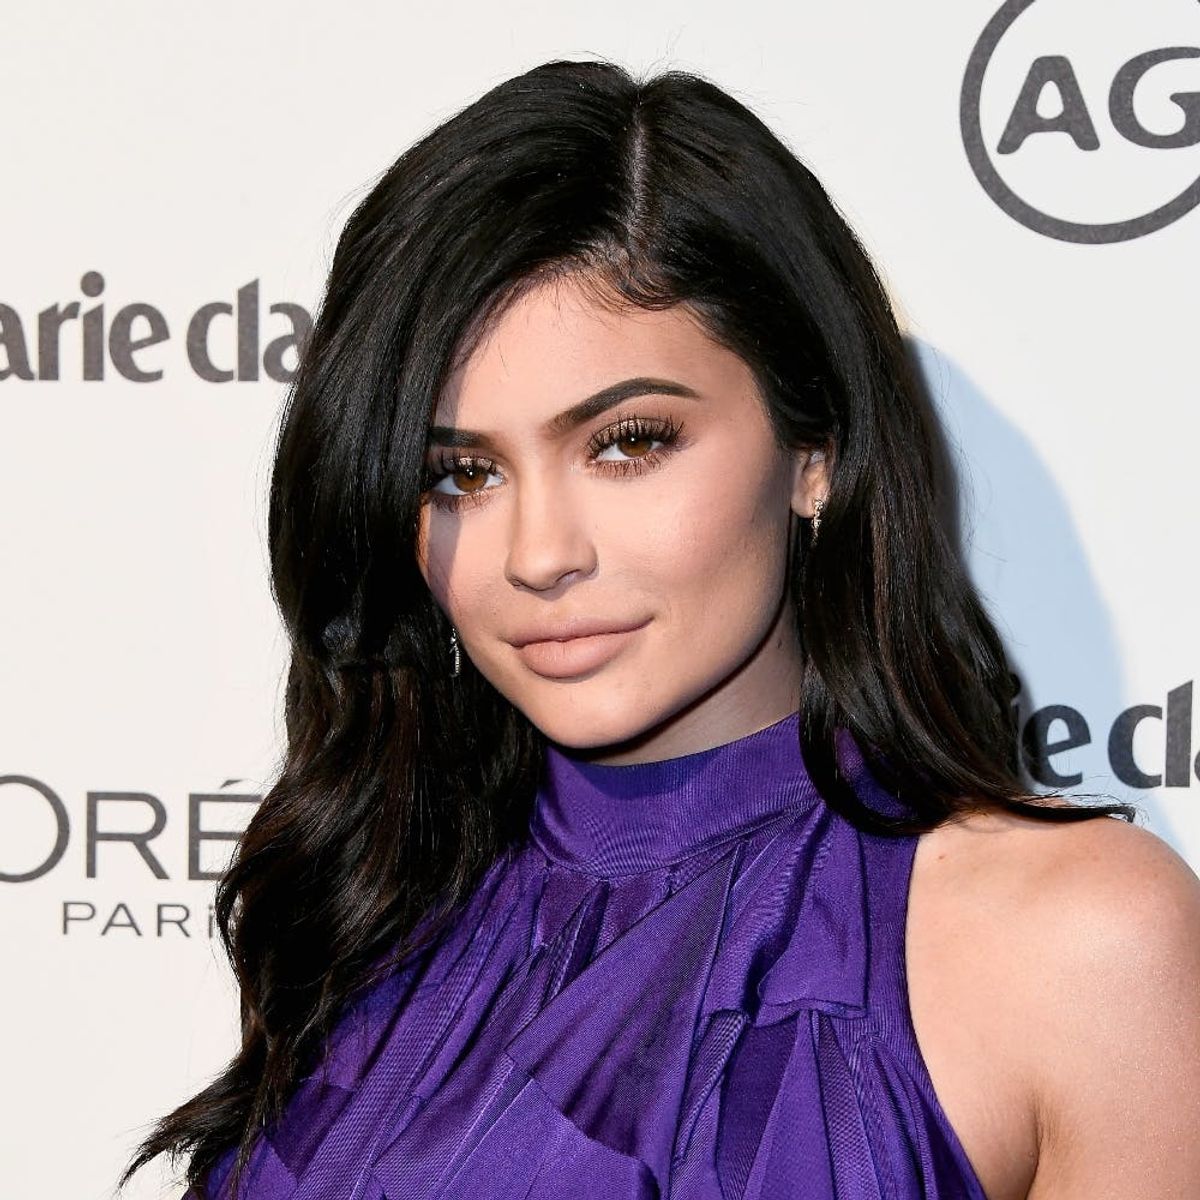 People Are Freaking Out Because Kylie Jenner Is Getting Her Own Show